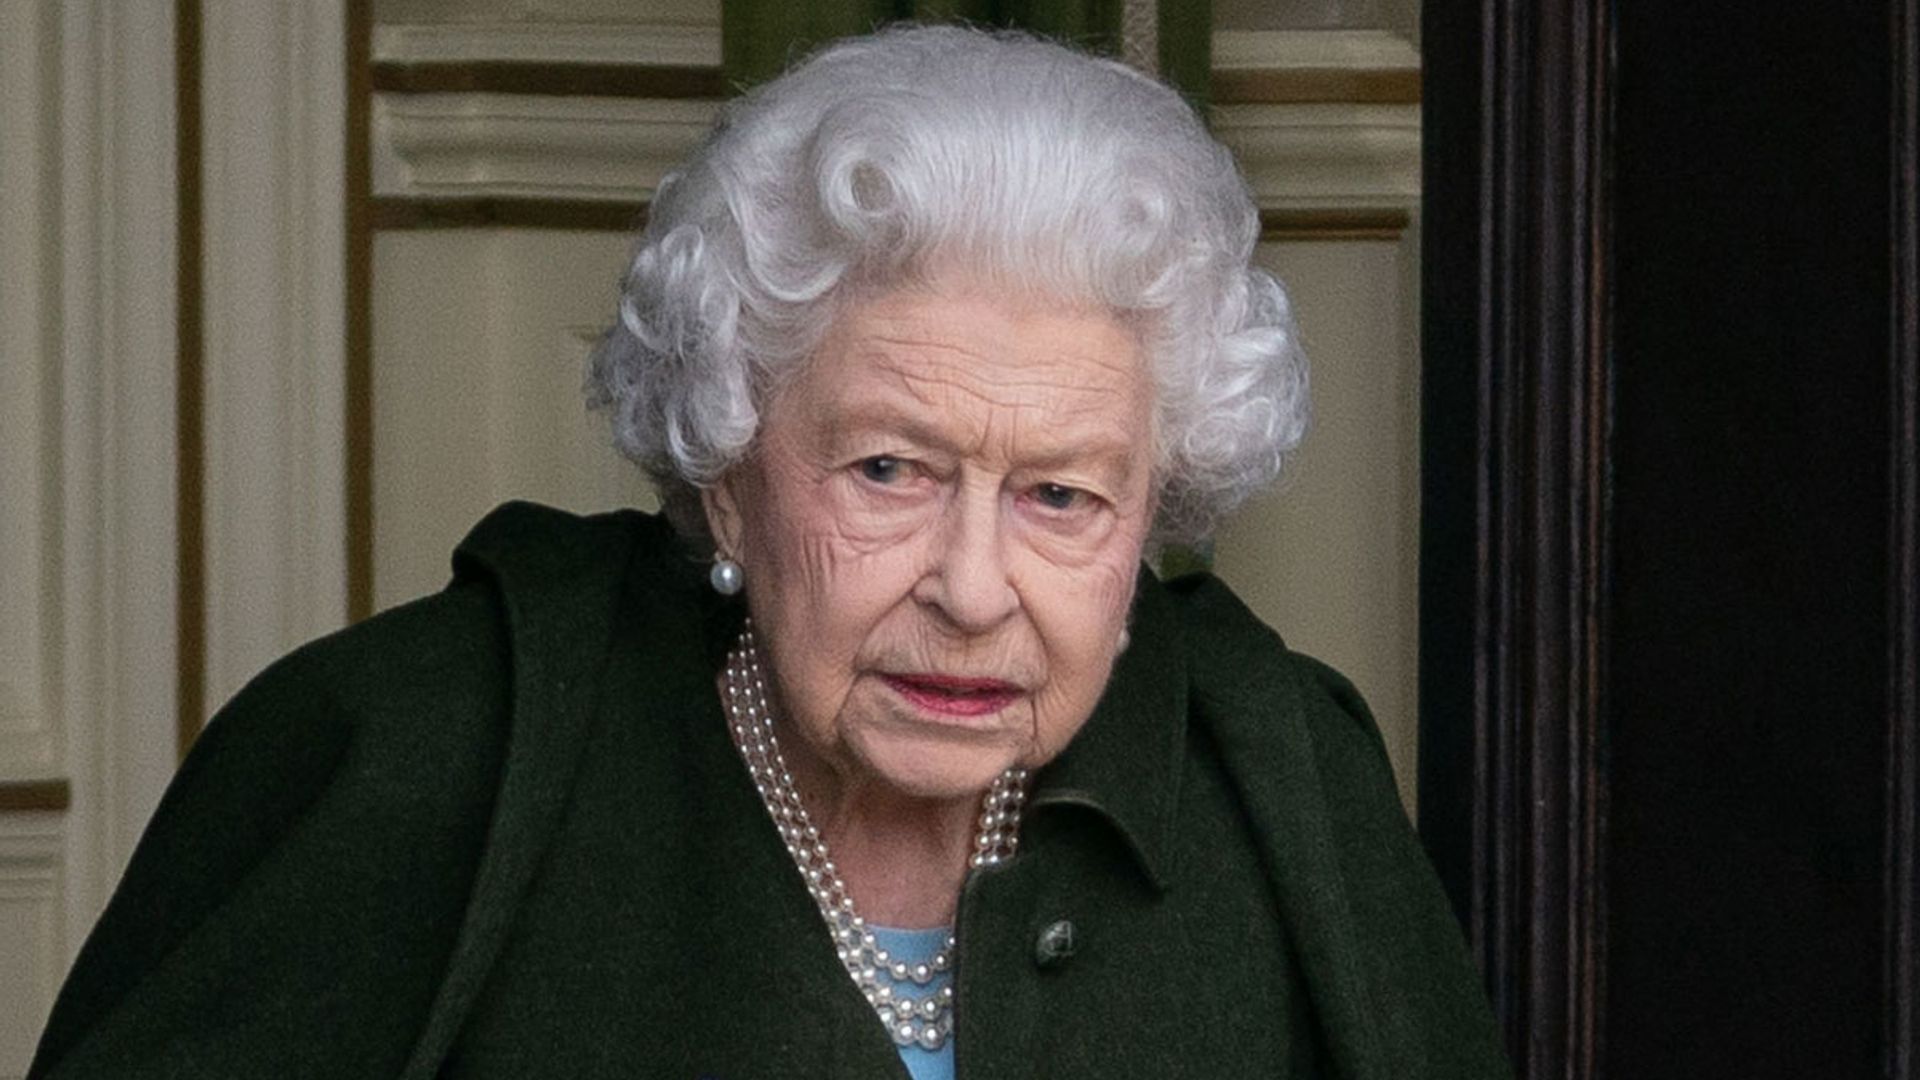 Will the Queen's ill-health prevent her from attending Prince Philip's memorial?